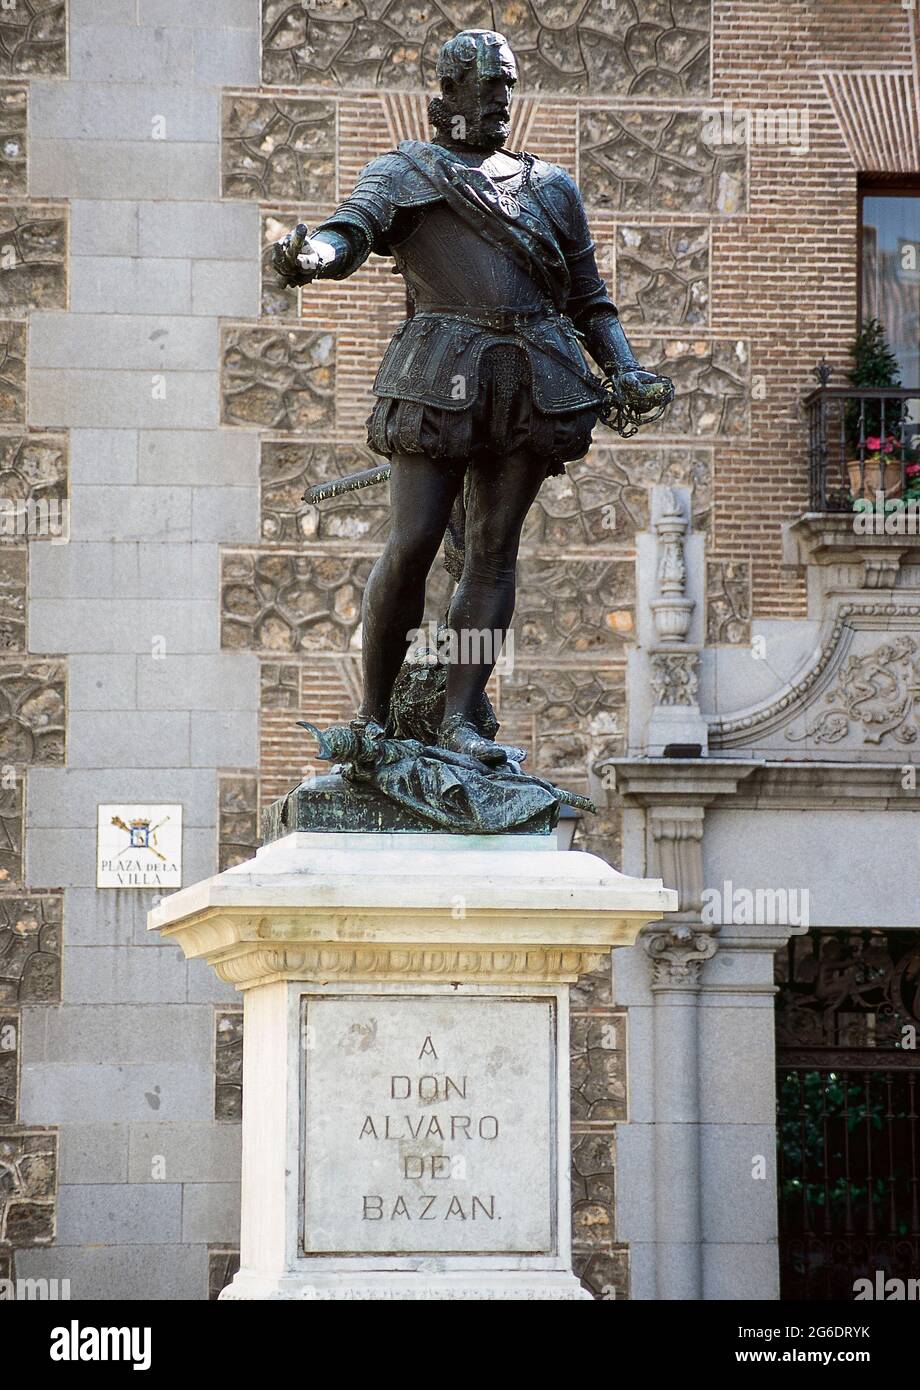 Alvaro de Bazán (Marquis of Santa Cruz) (1526-1588). Spanish marine and military. Admiral of Philip II. He led the taking of Tunis. In Lepanto he commanded the reserve fleet. Statue of Alvaro de Bazán, made in bronze by Mariano Benlliure (1862-1947). It was inaugurated by the Queen Regent María Cristina on 13 December 1891. It is located in the Plaza de la Villa in Madrid. Spain. Stock Photo